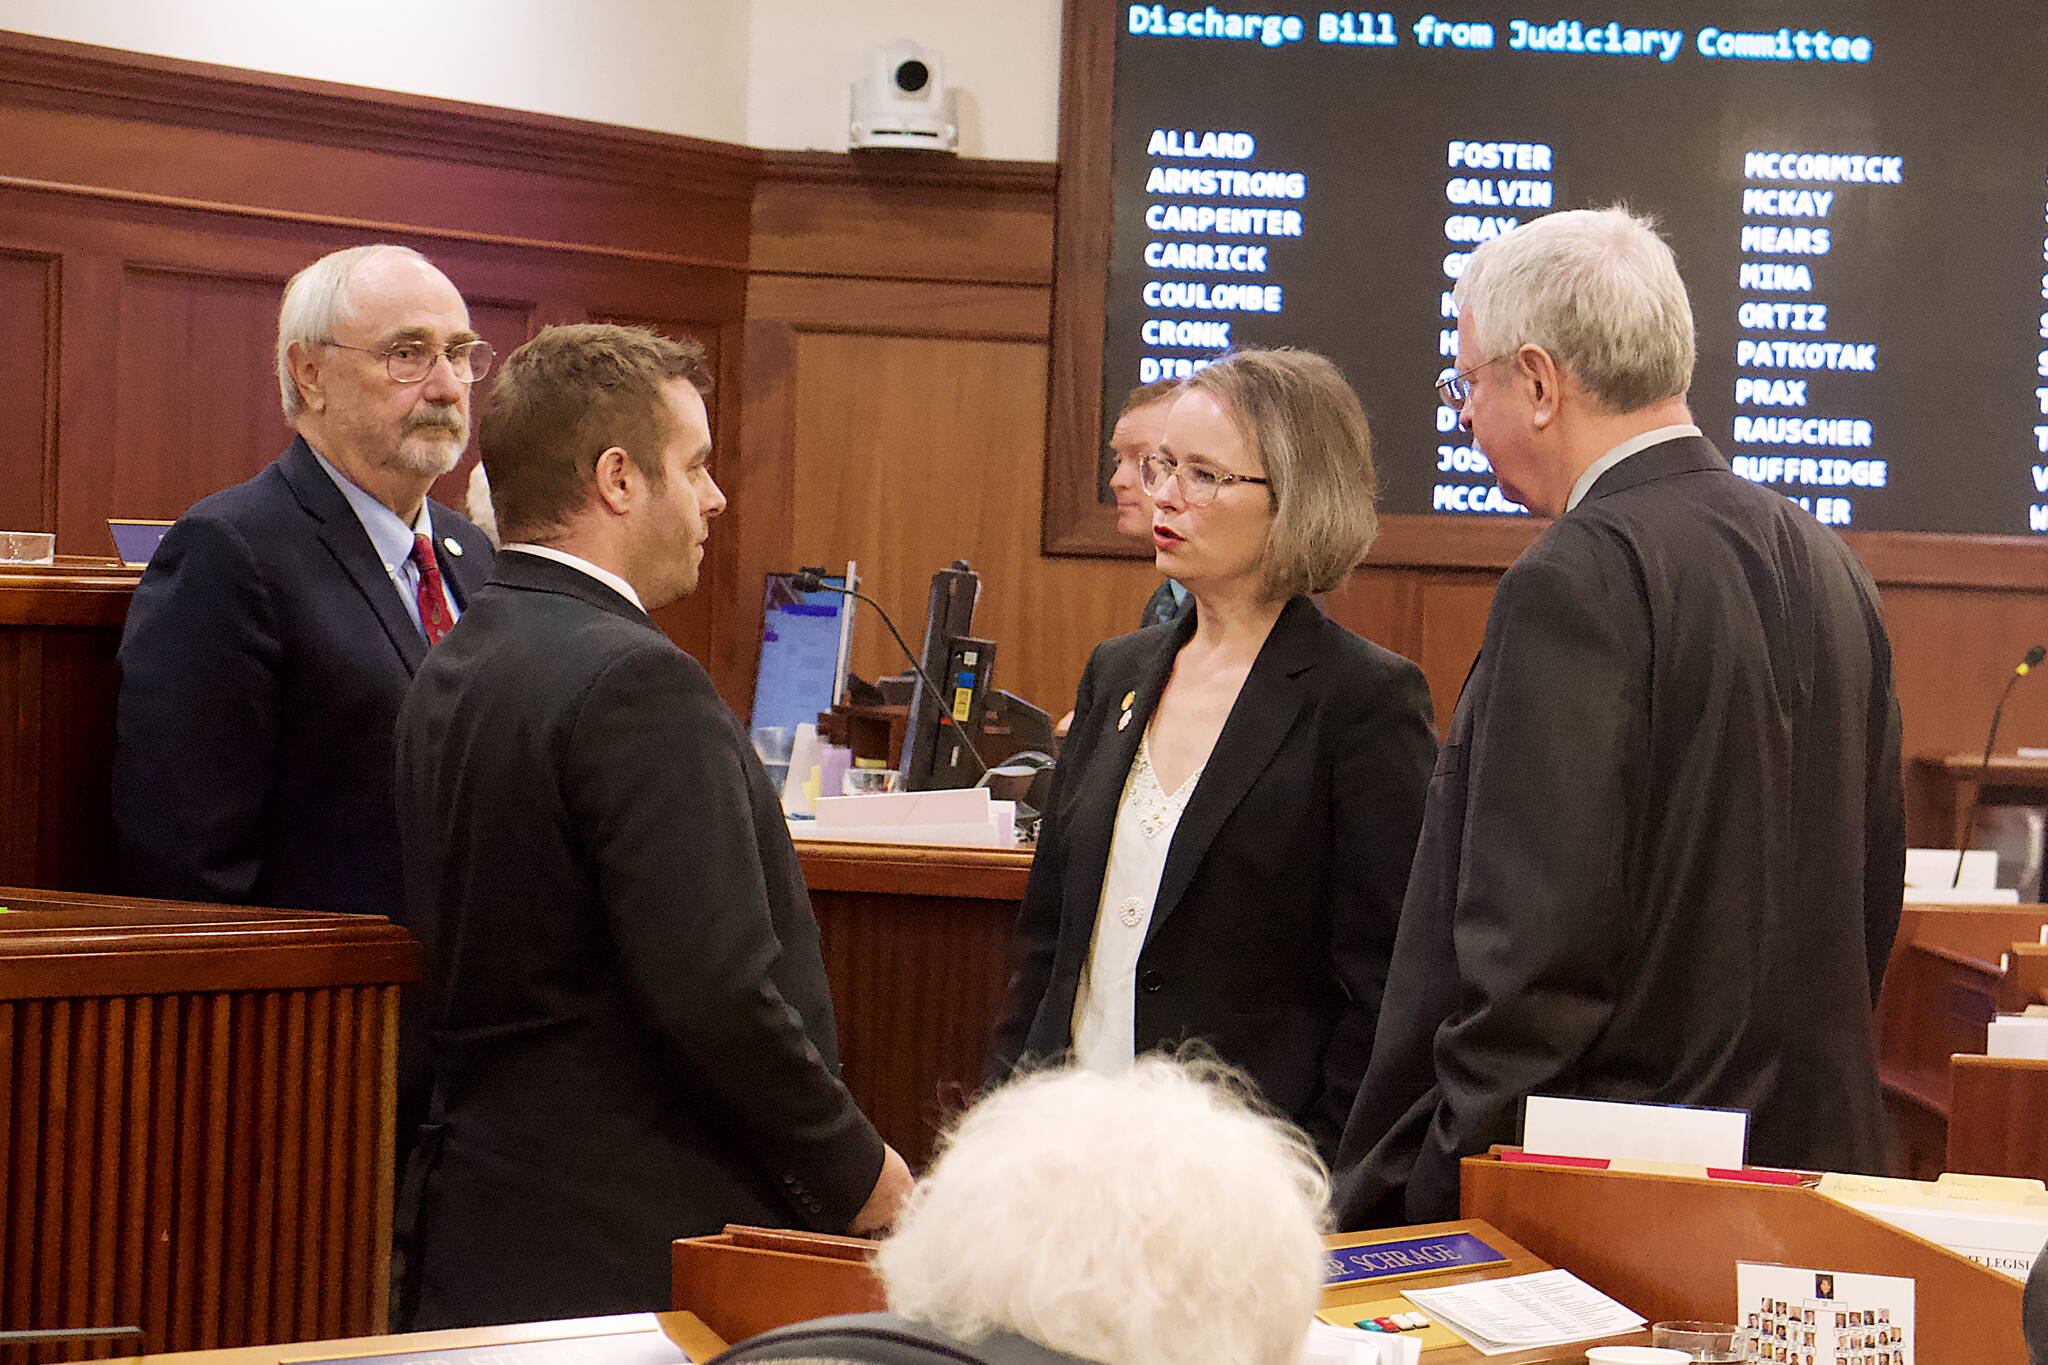 Rep. Sarah Vance, R-Homer, center, House Majority Leader Dan Saddler, R-Eagle River, right, and House Rules Chair Craig Johnson, R-Anchorage, talk to Rep. Jesse Sumner, R-Wasilla, about his request to have a bill discharged from the House Judiciary Committee chaired by Vance. The request was the second for a bill during Friday’s floor session, based on the belief Vance would not allow the bills to advance beyond her committee, following a floor vote when a bill she sponsored related to boycotts involving Israel failed by a 20-20 vote. (Mark Sabbatini / Juneau Empire)